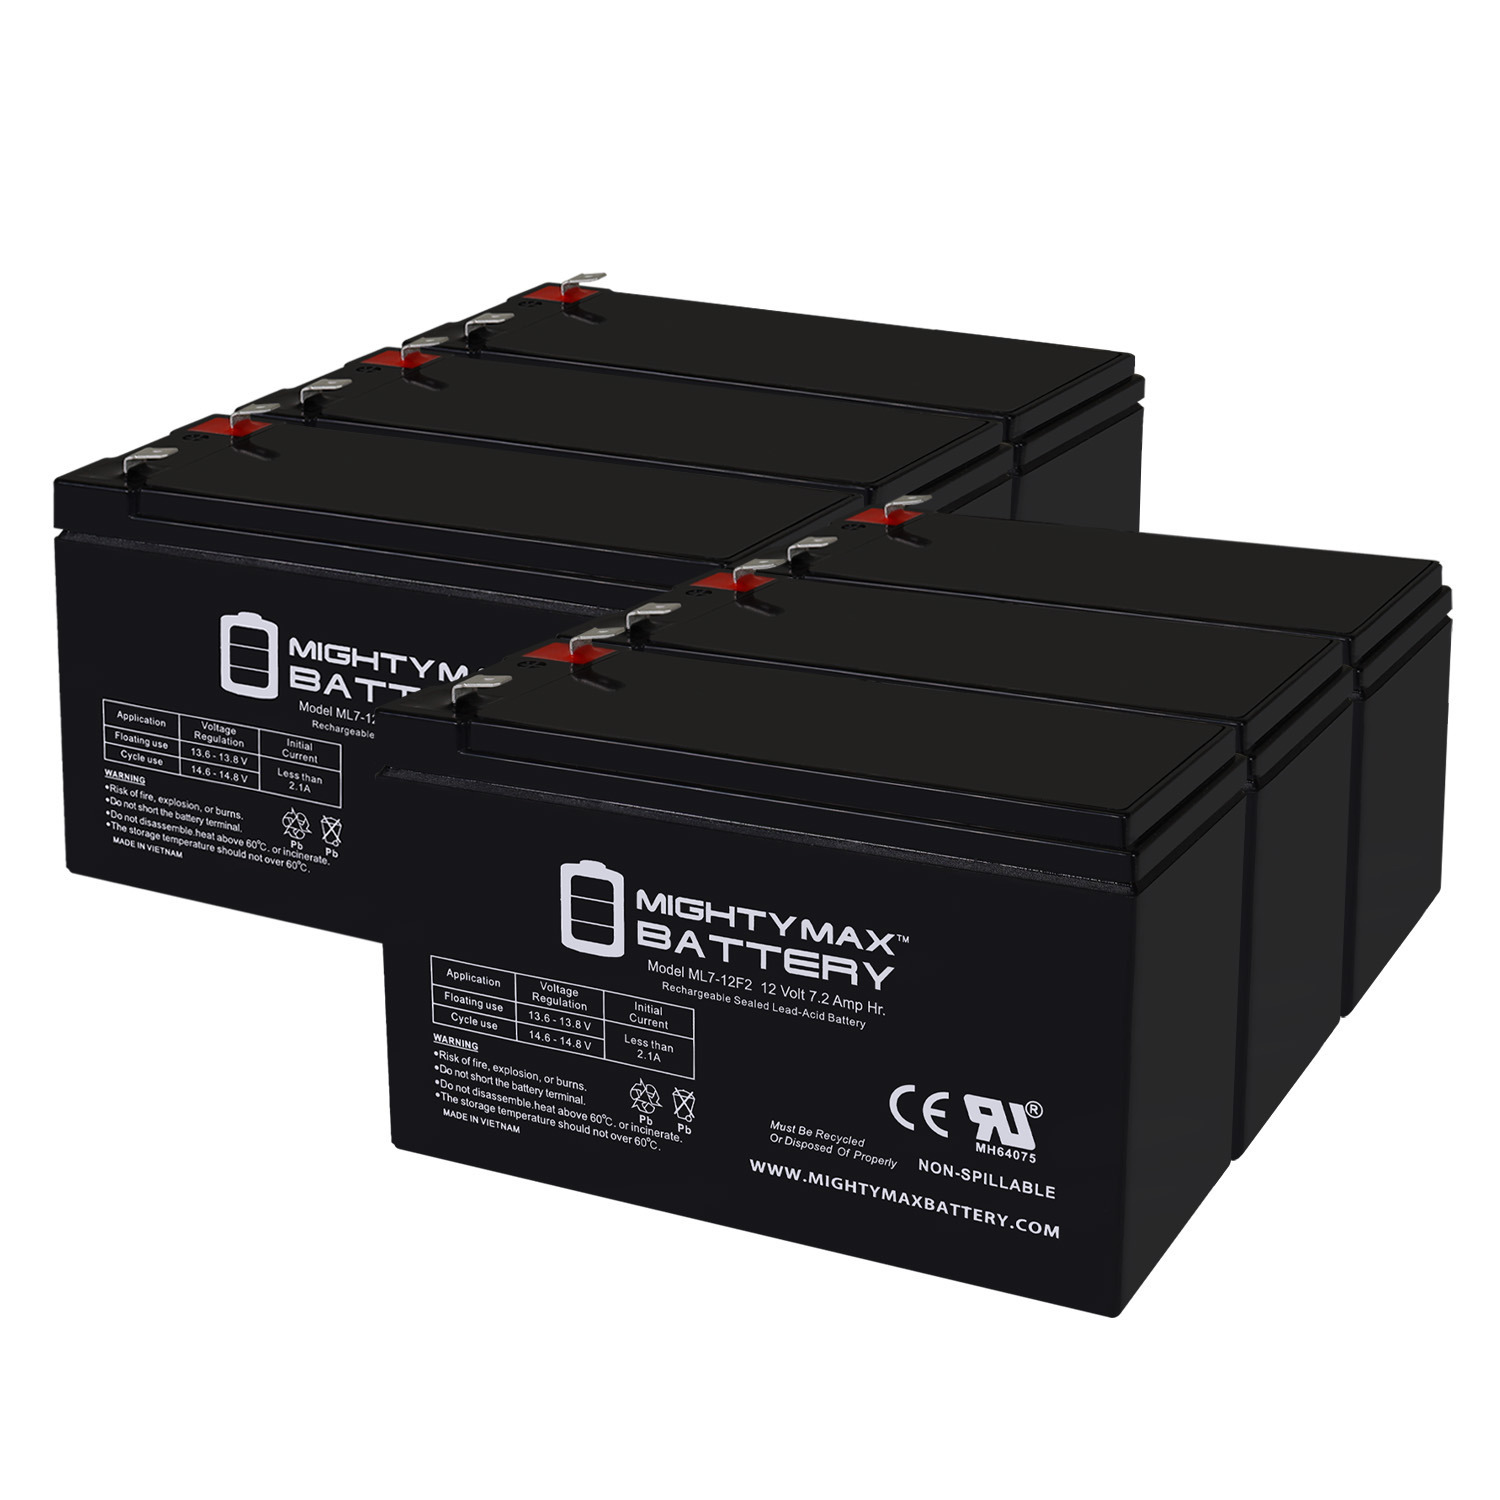 12V 7Ah F2 Replacement Battery for CyberPower AVR 800VA UPS - 6 Pack